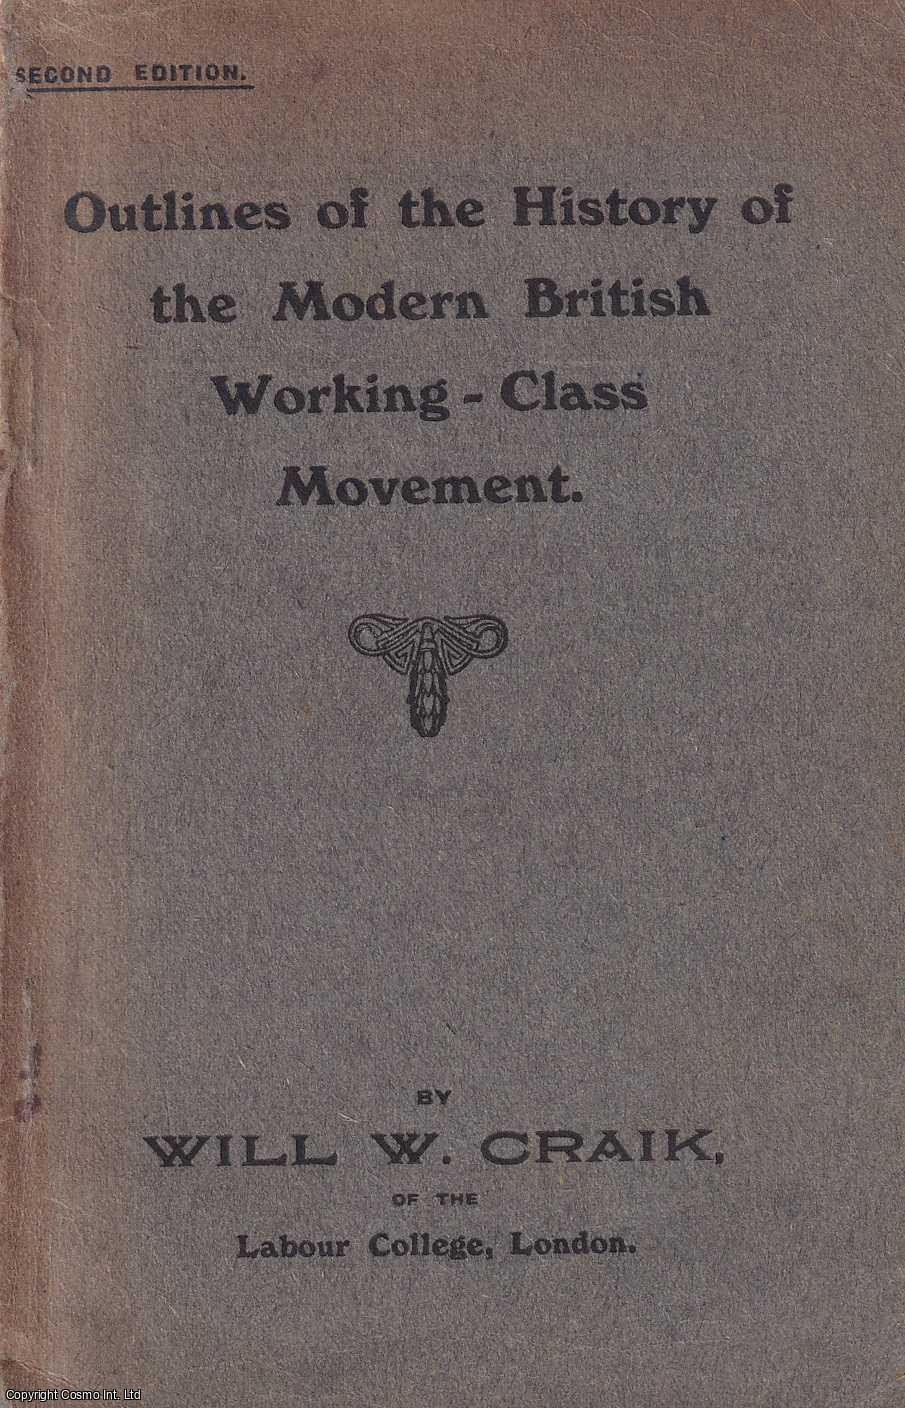 National　Softcover　the　by　faded　Craik:　Movement.　of　Working　Union　by　the　1916.　cover　Books　(1916)　Will　History　Class　Outlines　Cosmo　Published　British　W.　Modern　of　Edition.　of　Railwaymen　Good　Second